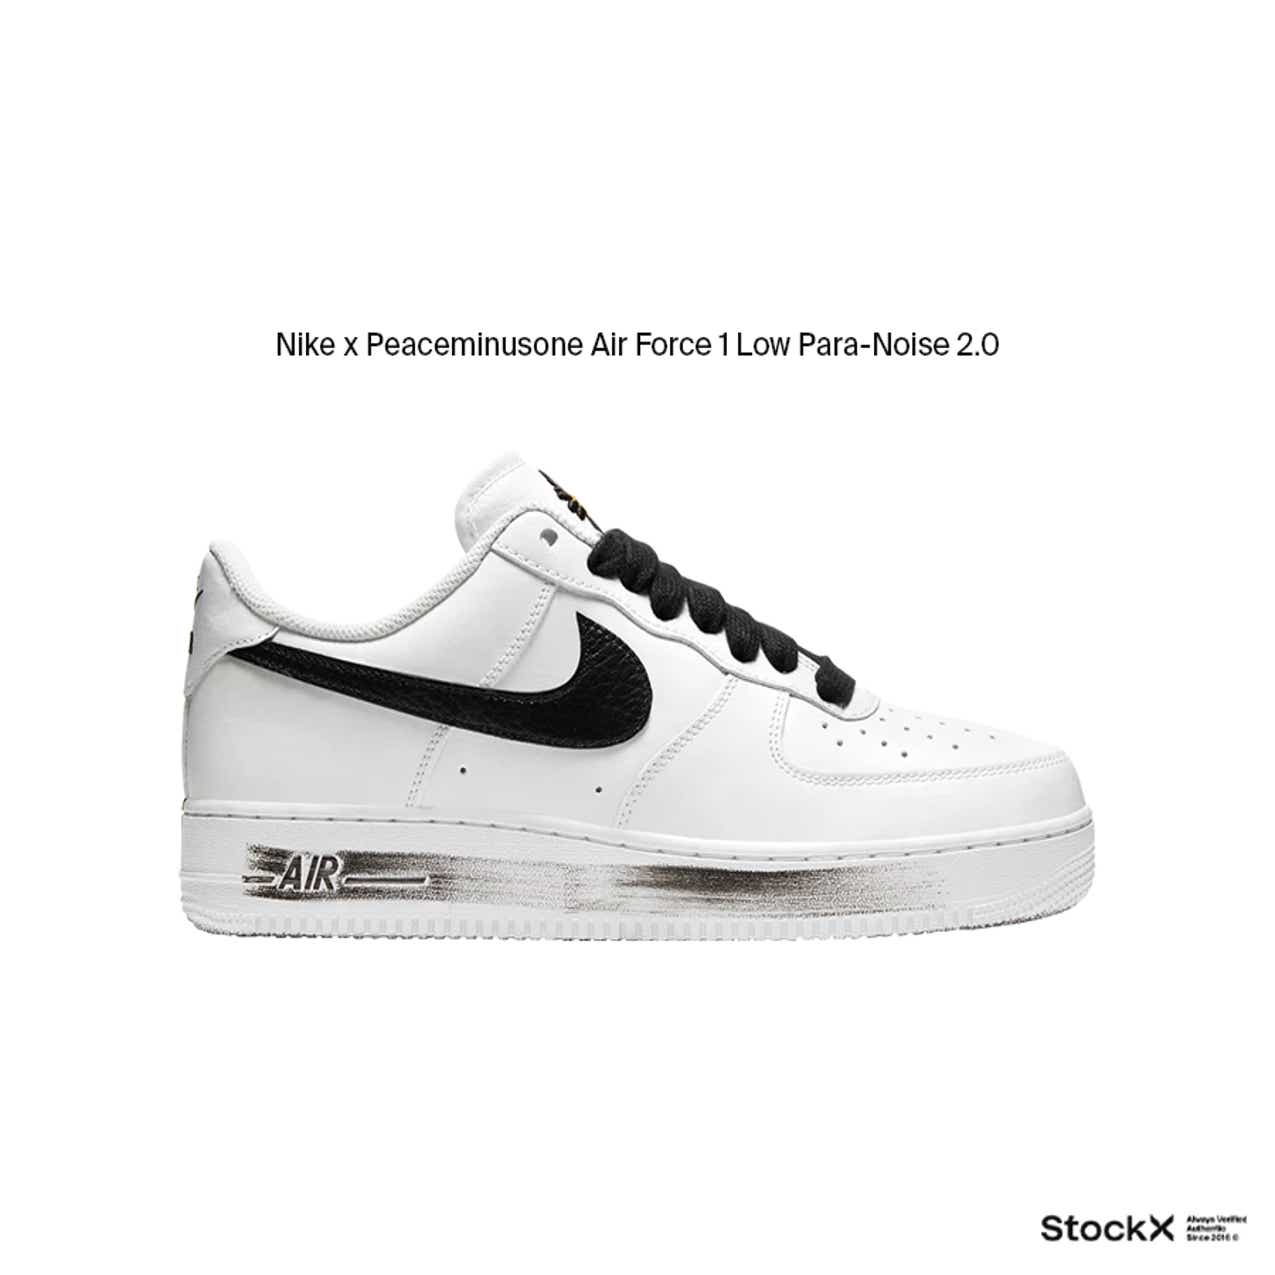 Secondary_B2_Nike x Peaceminusone Air Force 1 Low Para-Noise 2.0